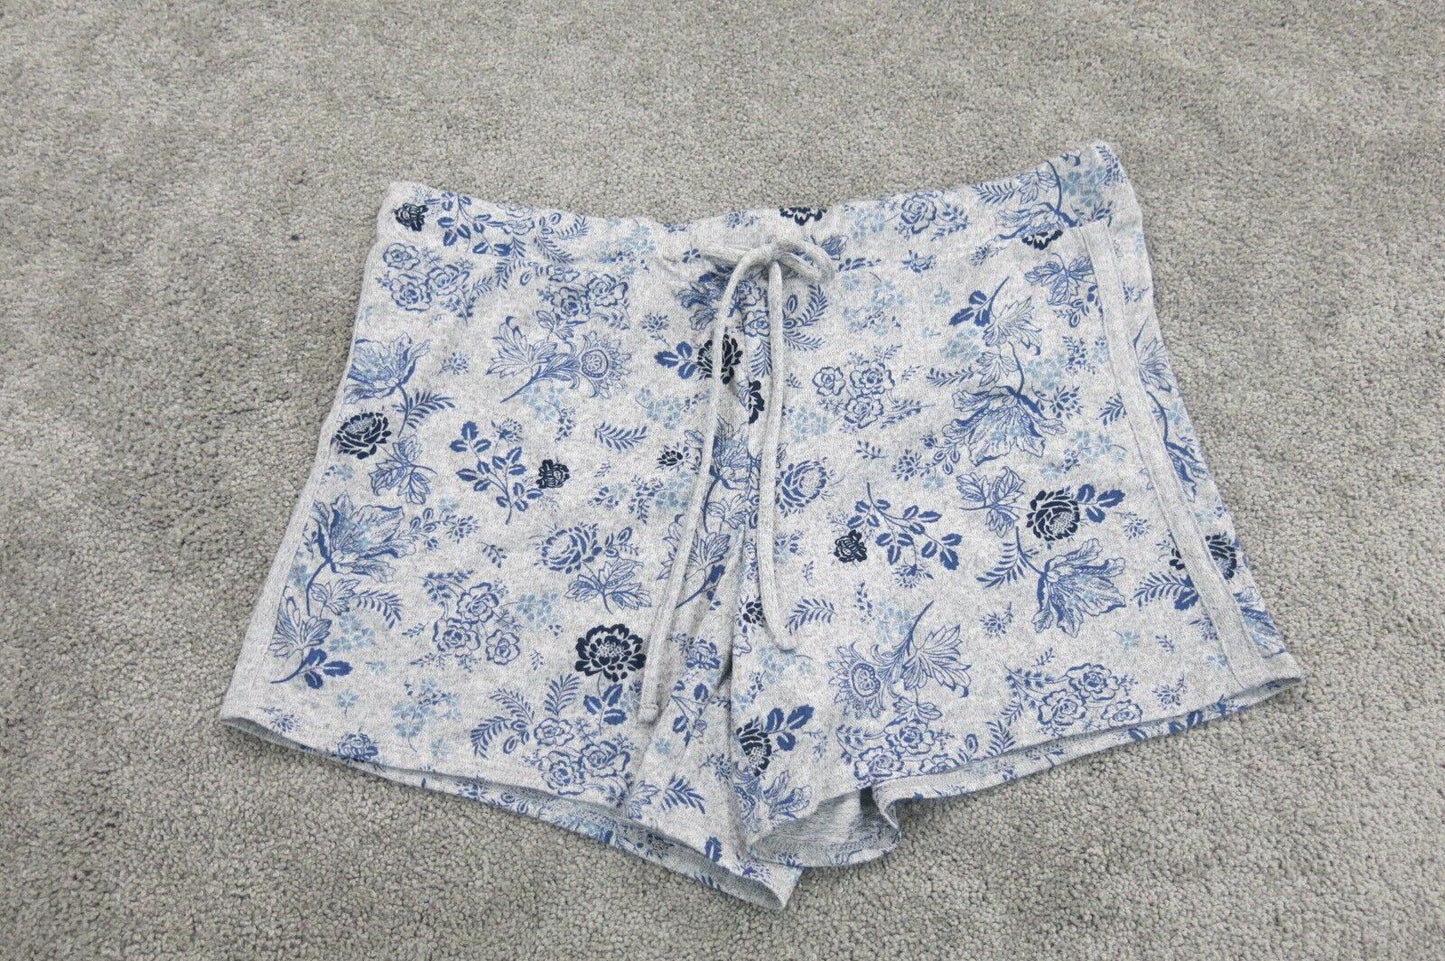 Lucky Brand Womens Athletic Running Shorts Drawstring Waist Floral White Blue M